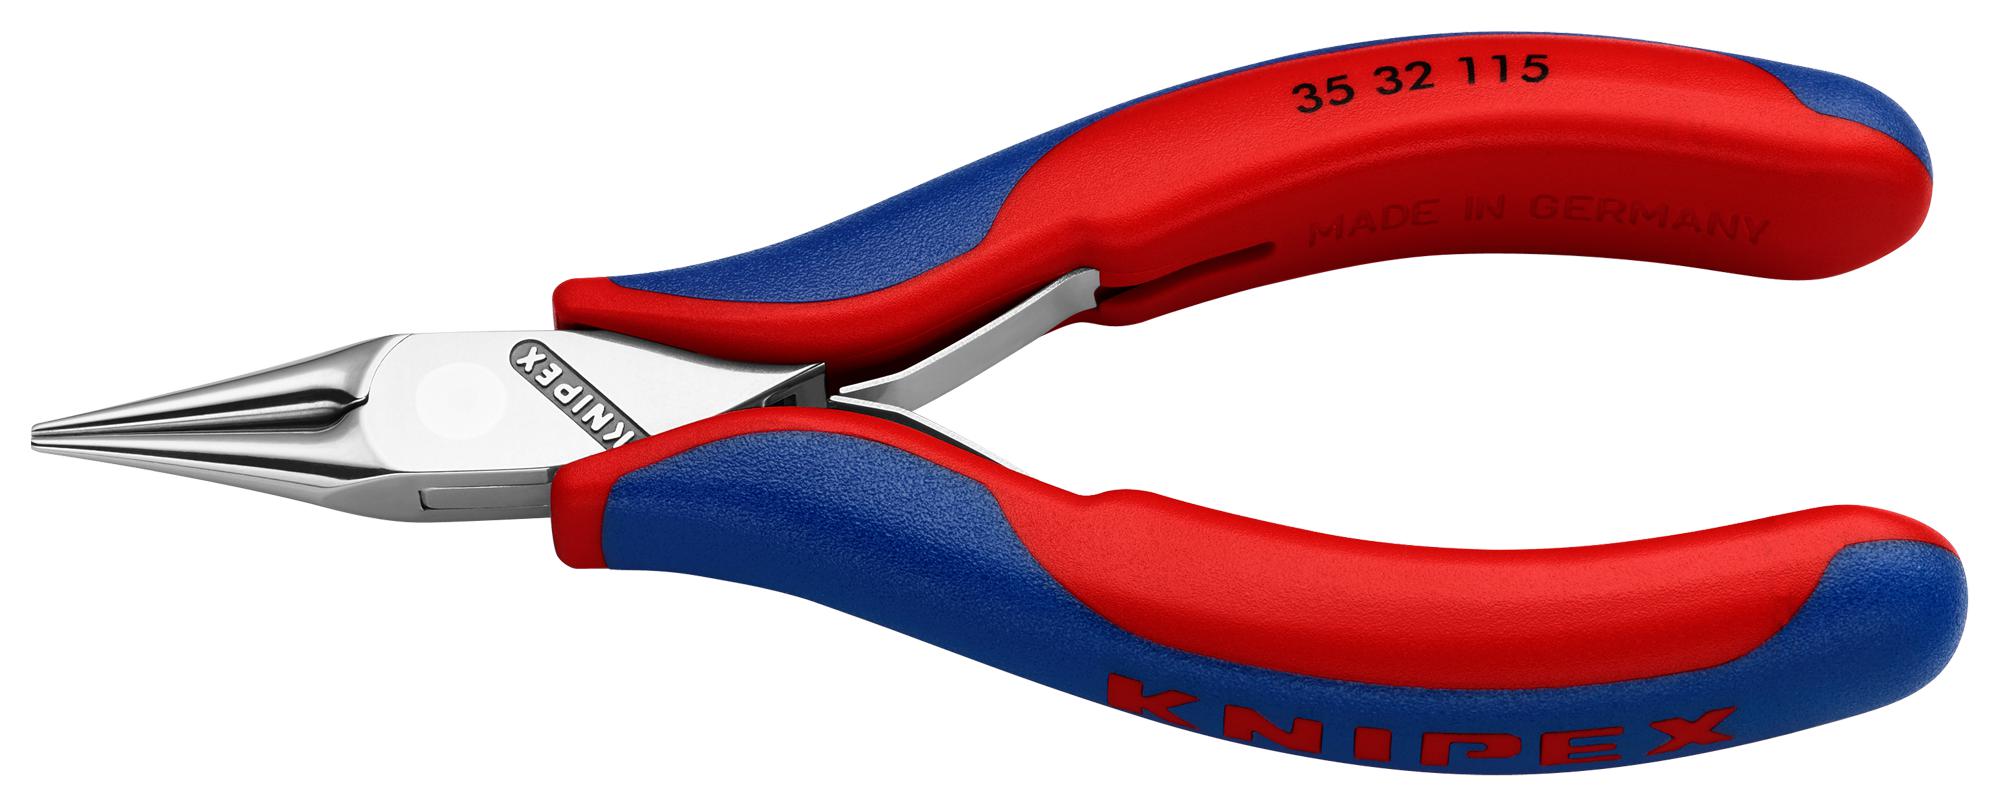 35 32 115 RELAY ADJUSTING PLIERS KNIPEX